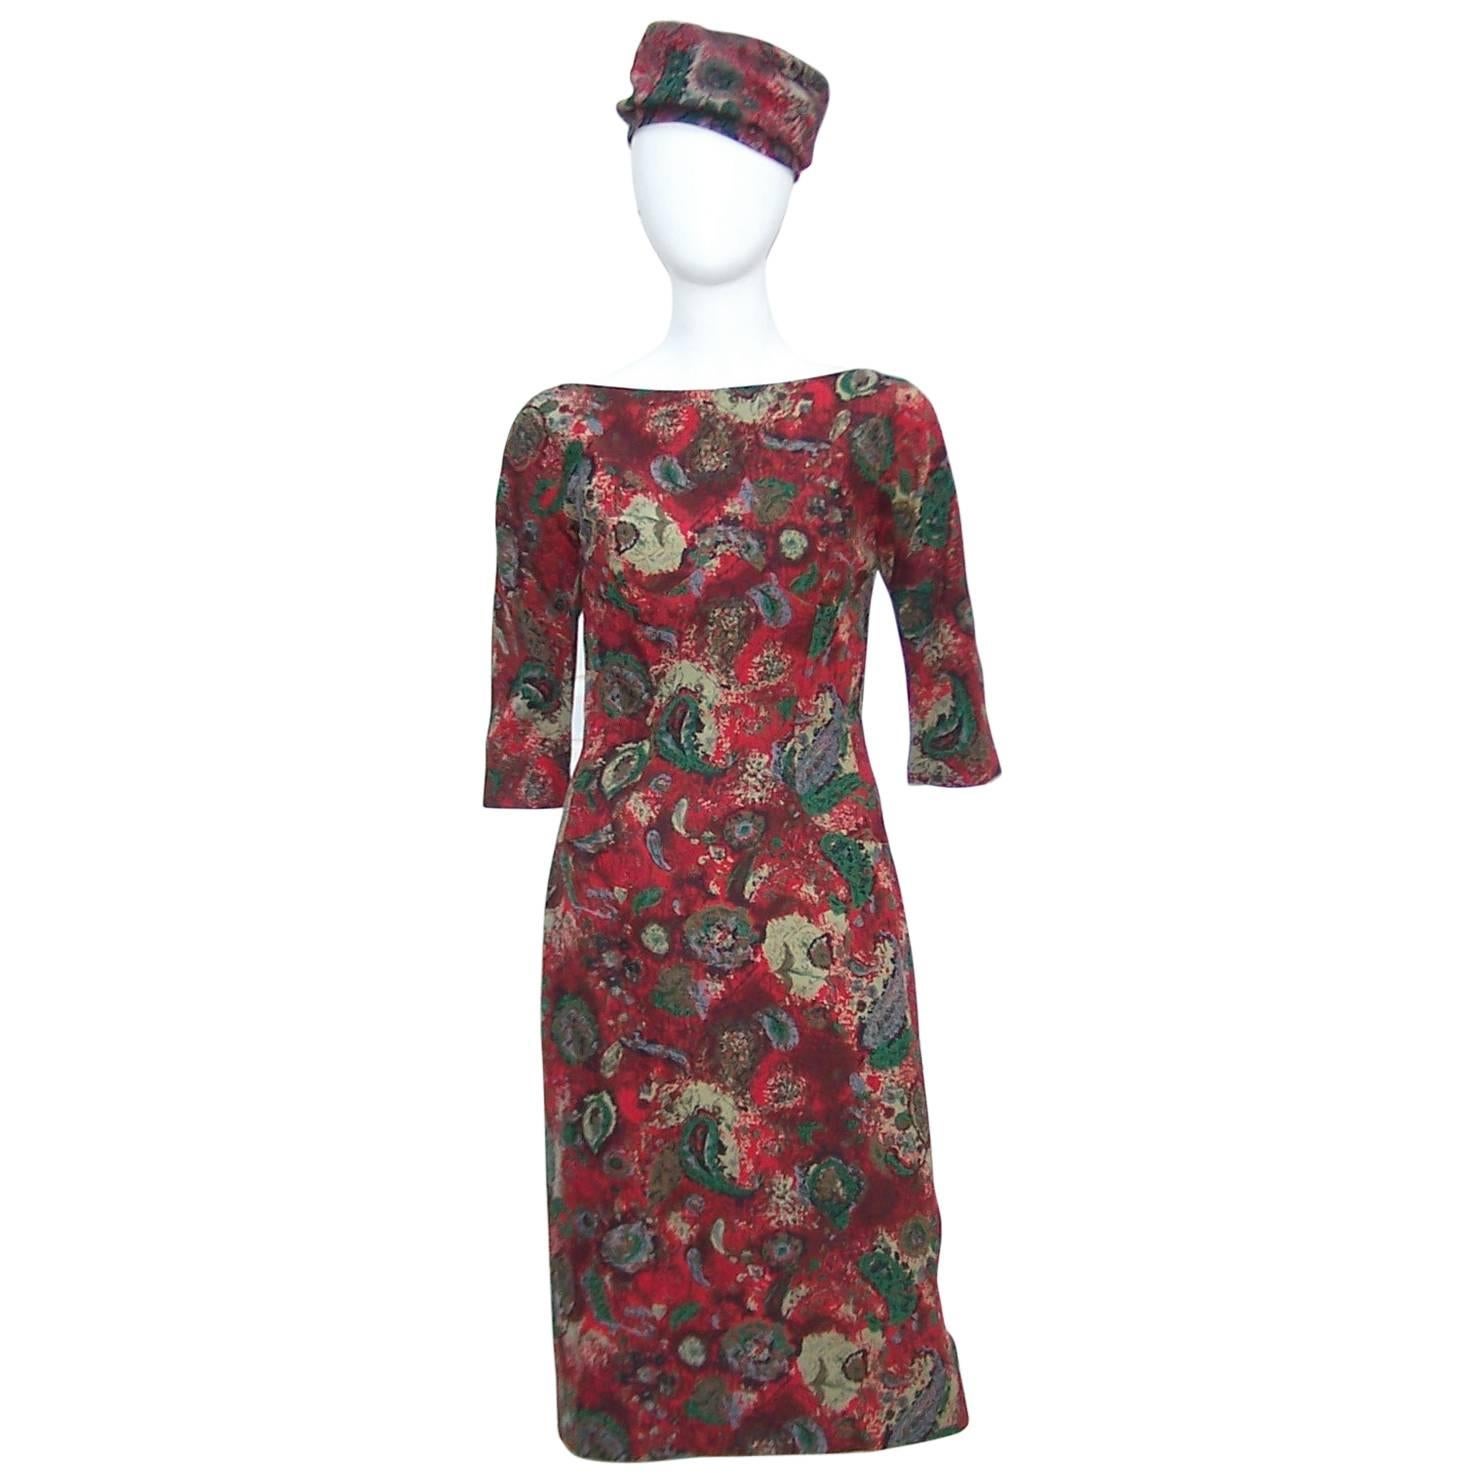 1950's Suzy Perette Abstract Paisley Print Dress With Bustle Kick Pleat & Hat